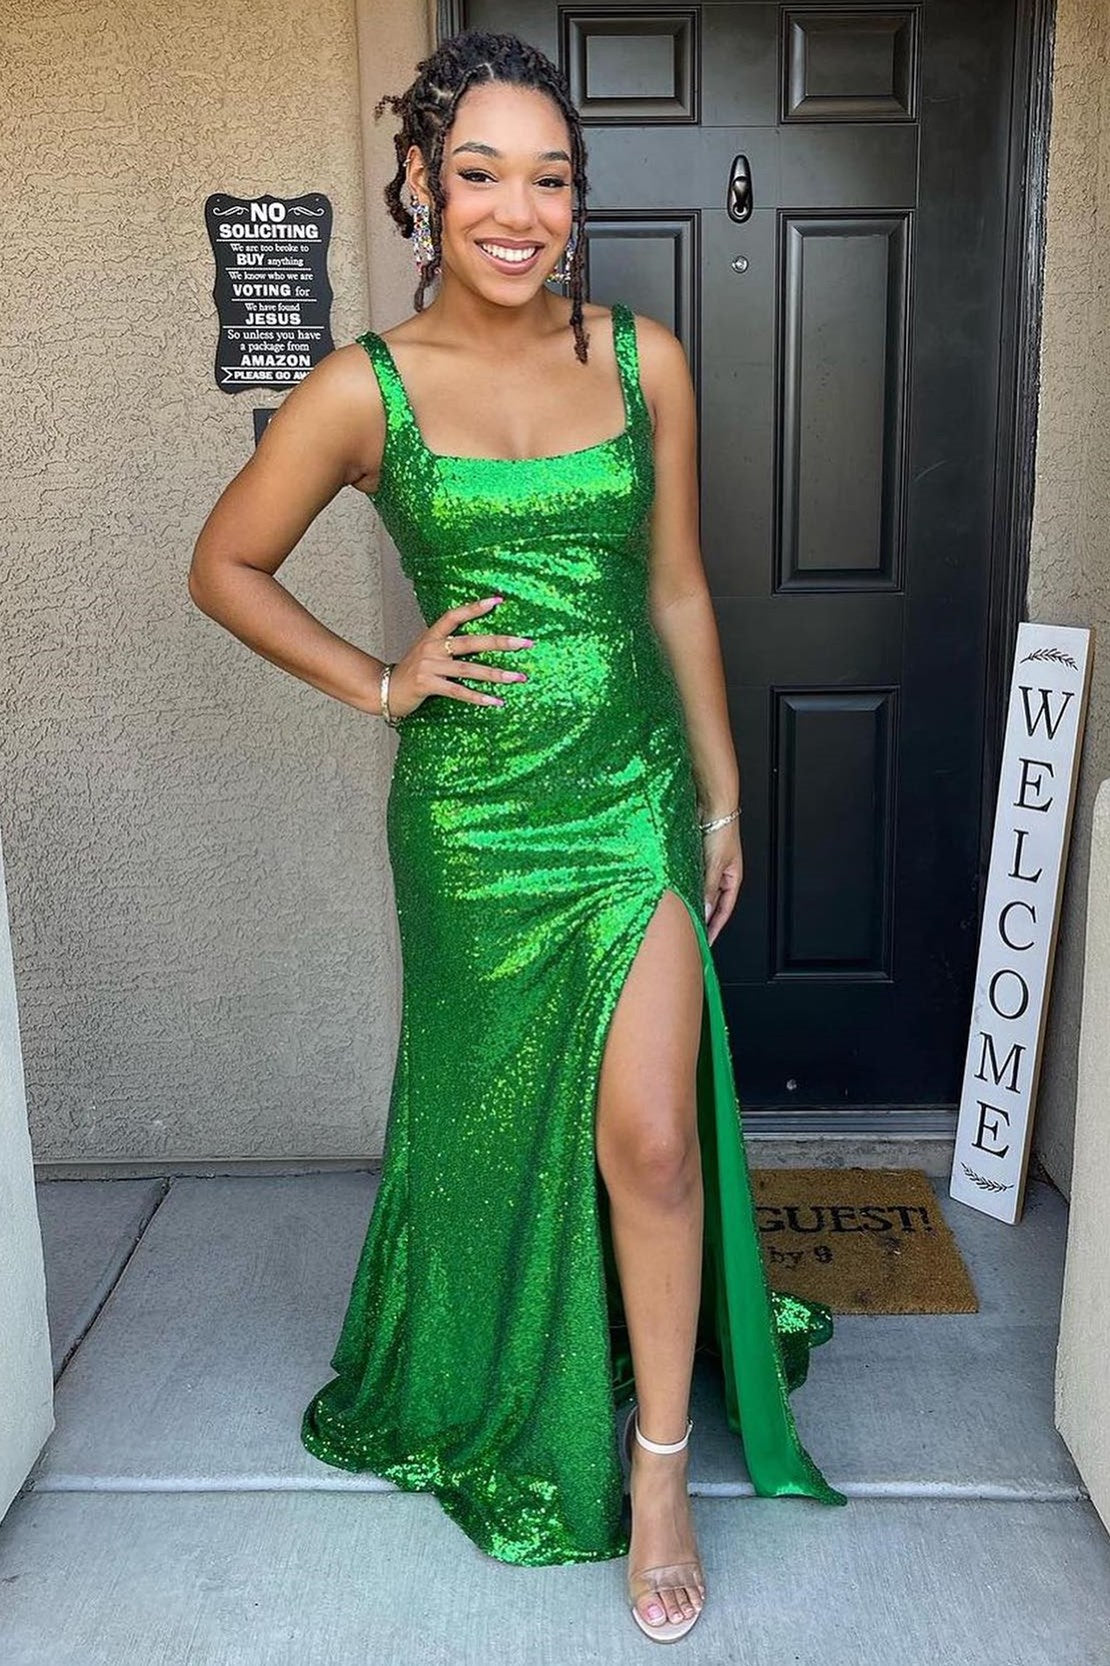 Logan |Mermaid Square Neck Sequins Long Prom Dress with Slit